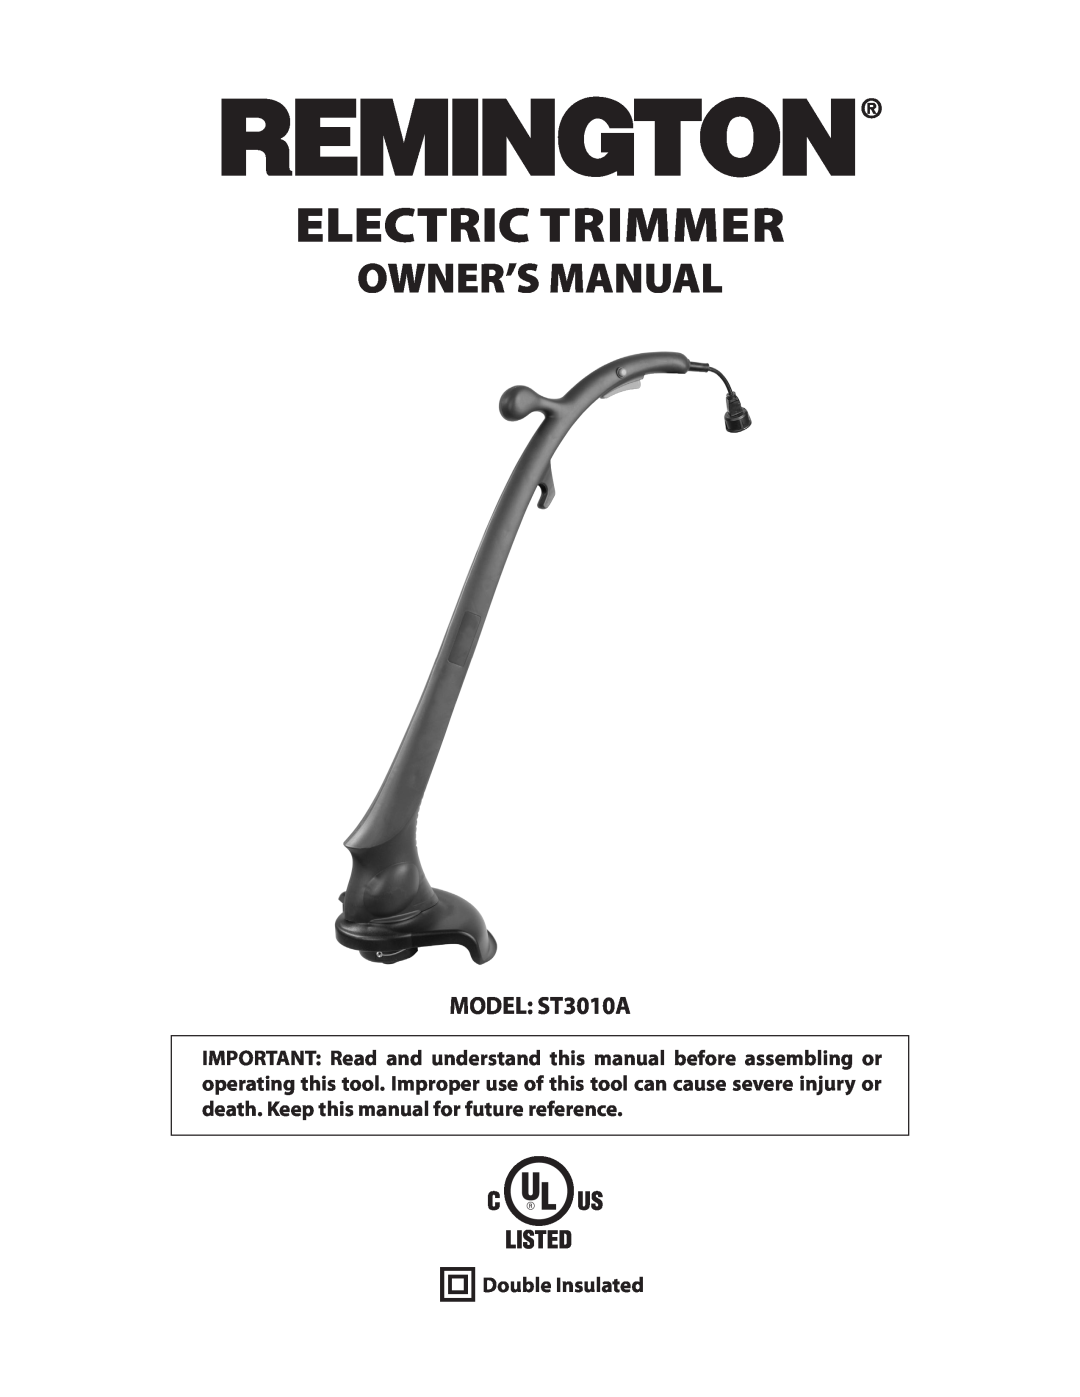 Remington Power Tools owner manual Electric Trimmer, MODEL ST3010A, Double Insulated 